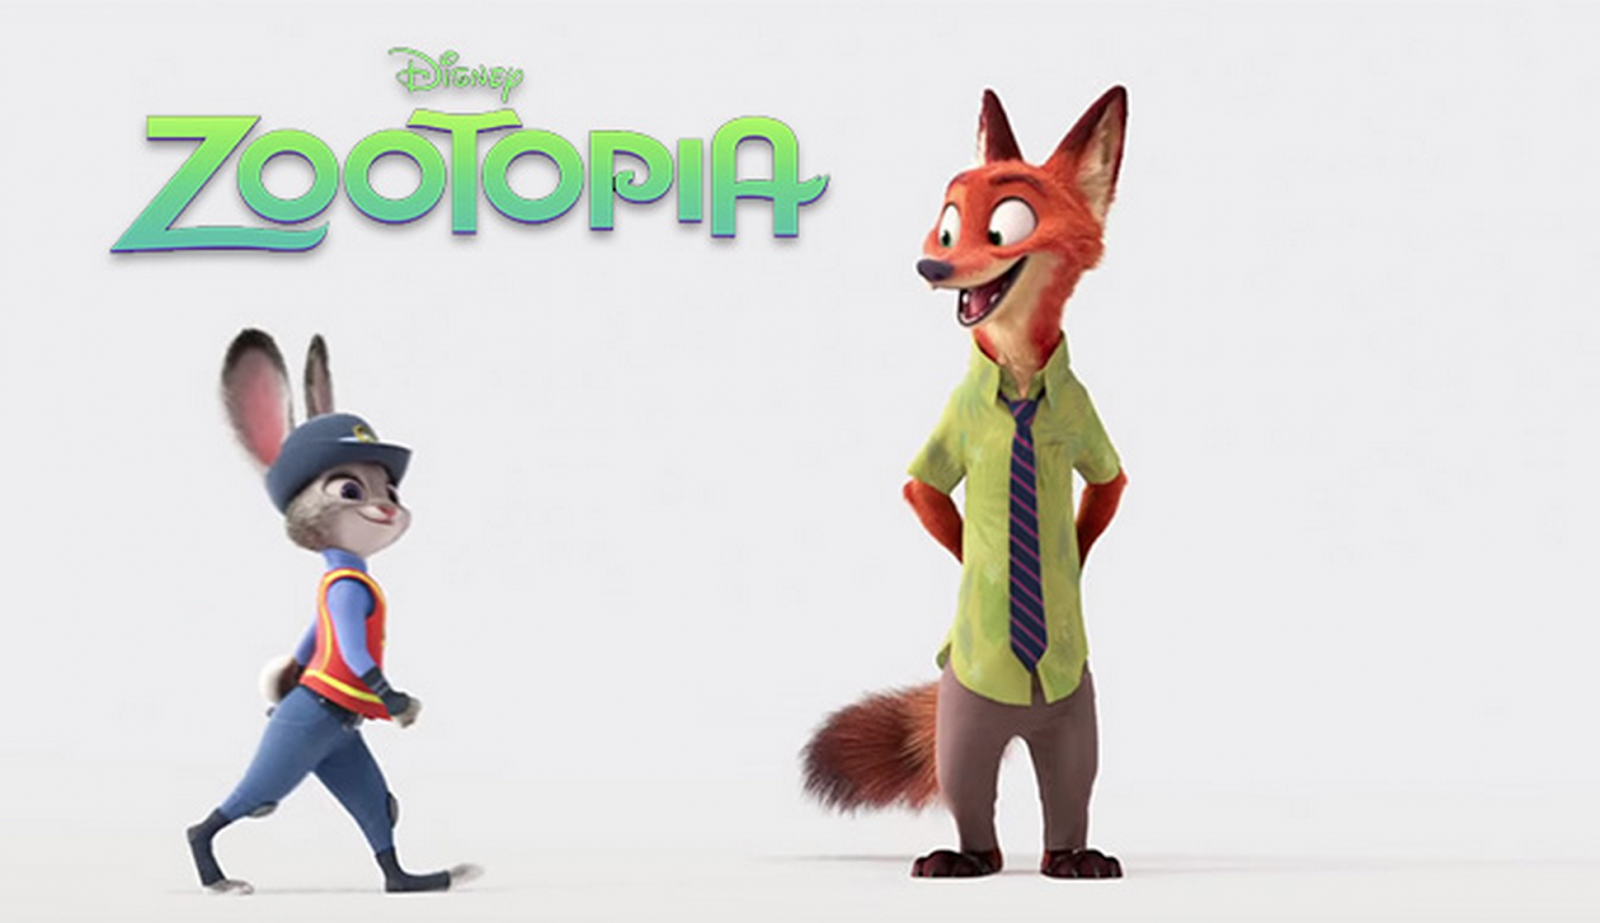 Zootopia Wallpapers 2016 - Boss Wallpapers 5k, 4k and 8k Ultra HD, UHD Download Free1600 x 923